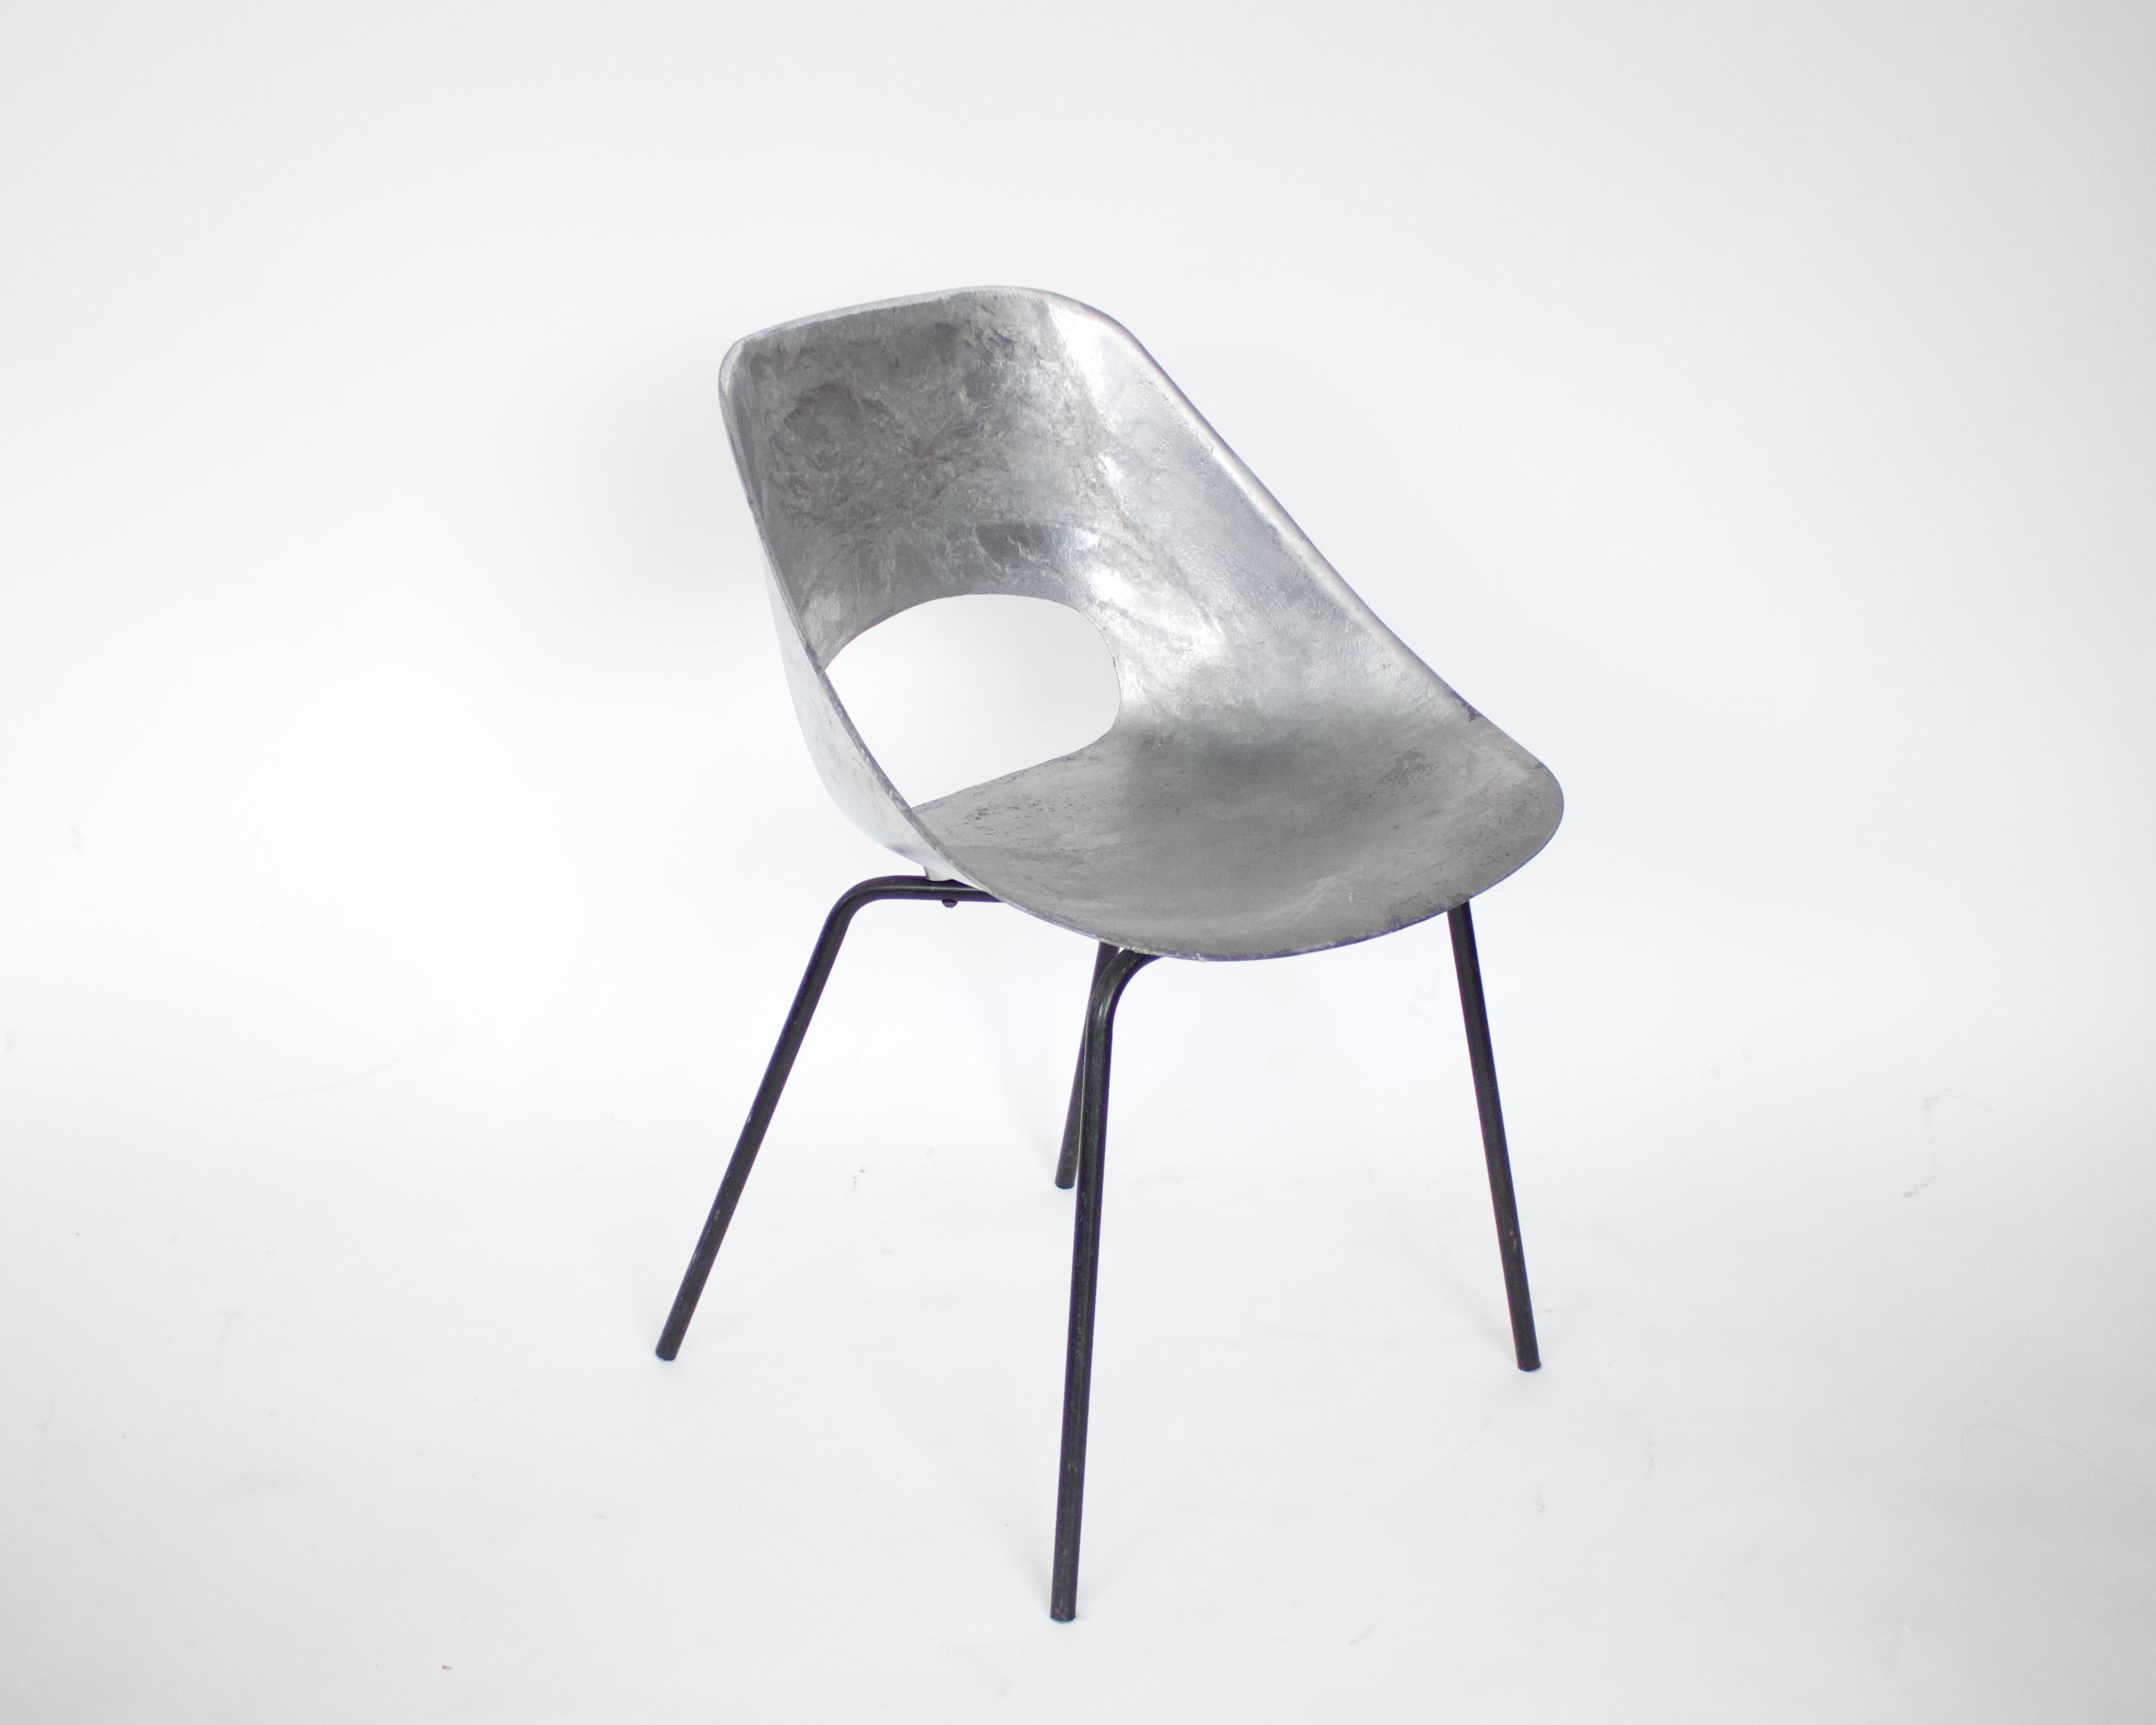 Cast aluminum Tulip chair by Pierre Guariche for Steiner, France, 1954.
Sculpted and curved cast aluminum seat with an opening on the seat on sleek four leg black tubular metal base. Statement chair and collectable. Comfortable and also a standalone